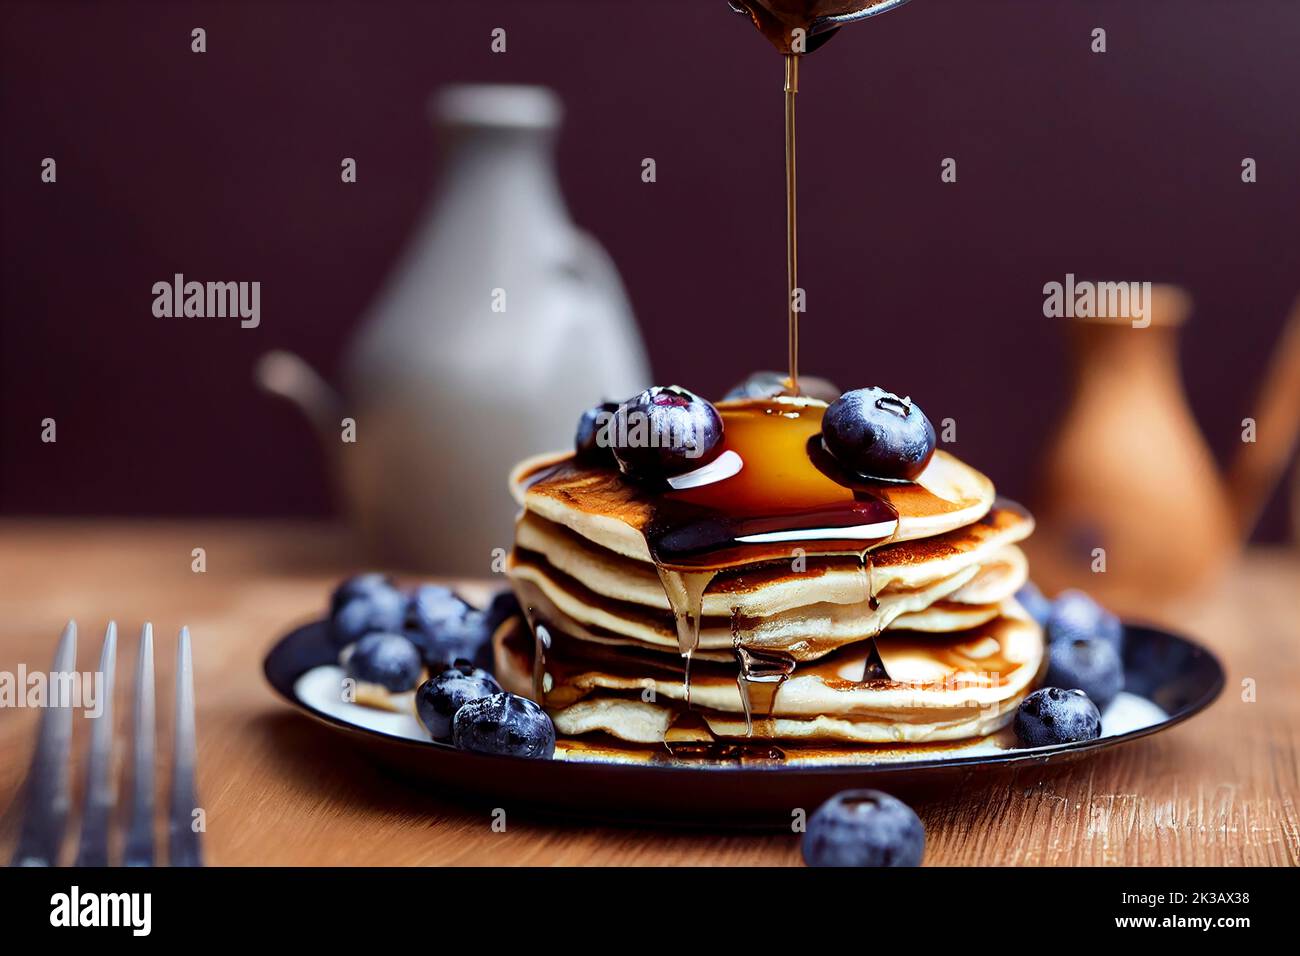 Maple syrup dripping onto a stack of blueberry pancakes, traditional breakfast or brunch, food photography and illustration Stock Photo